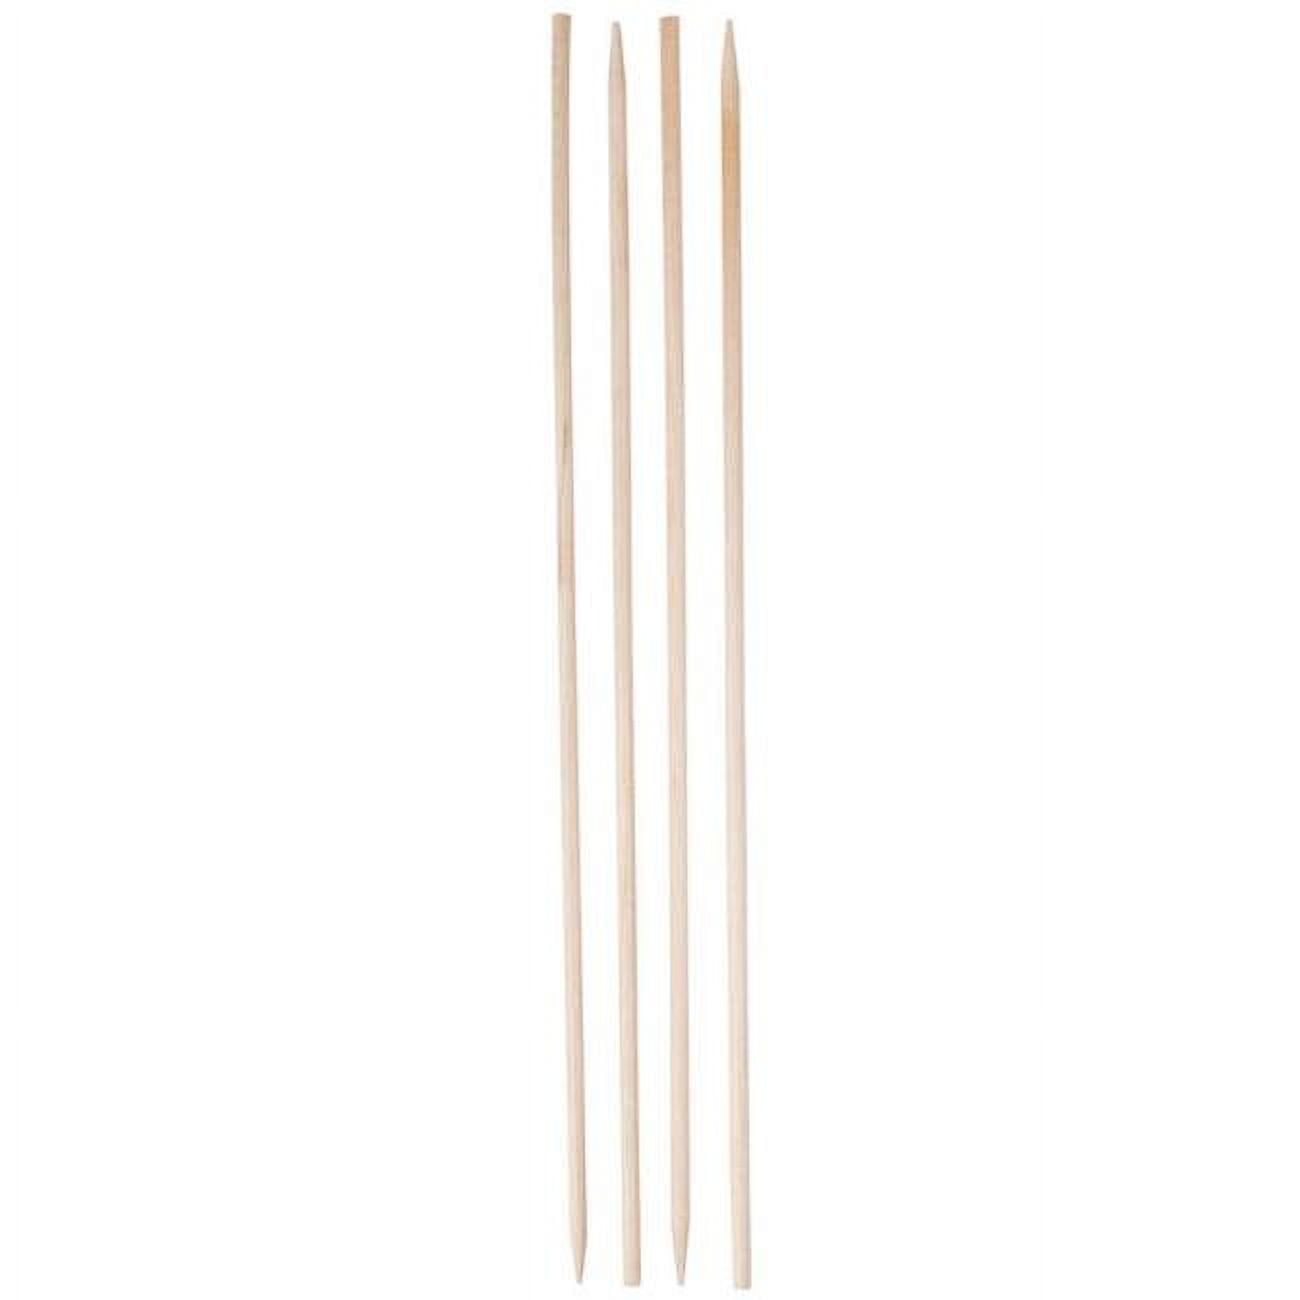 Ws10 Cpc 10 In. Wood Skewer Finish Shish, Case Of 3000